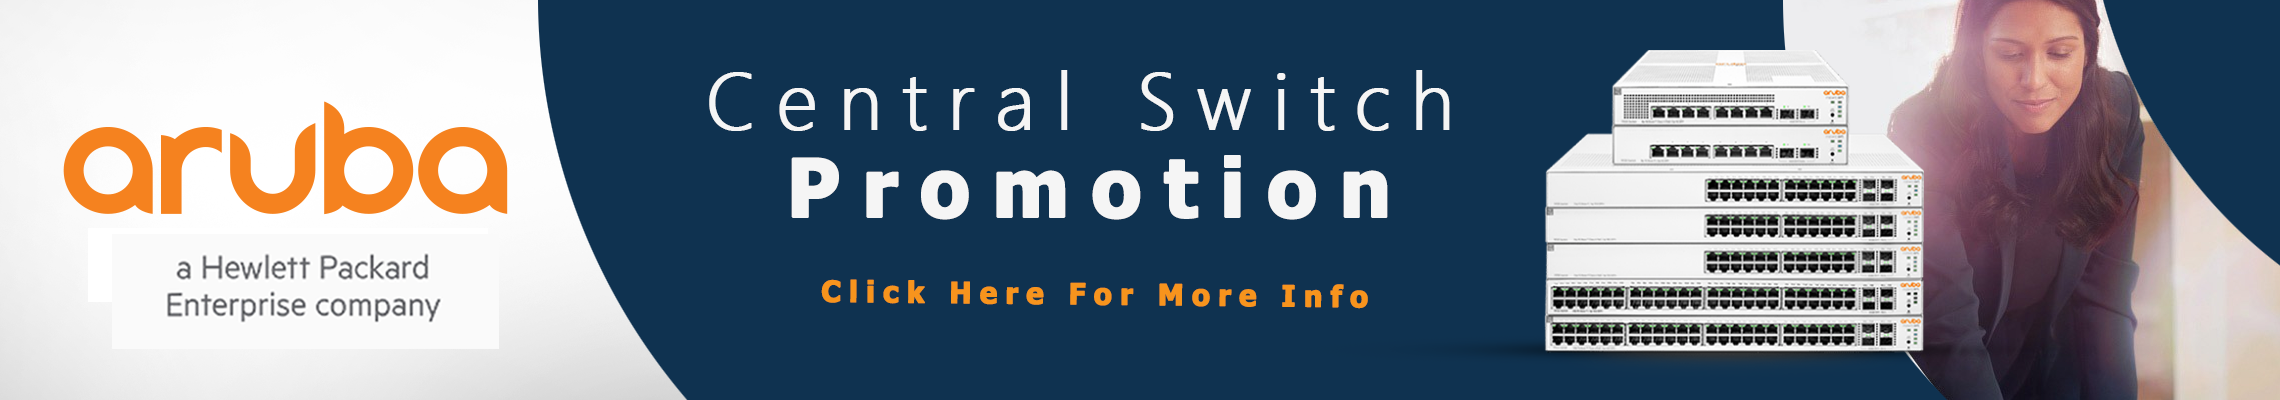 Central Switch Promo Banner